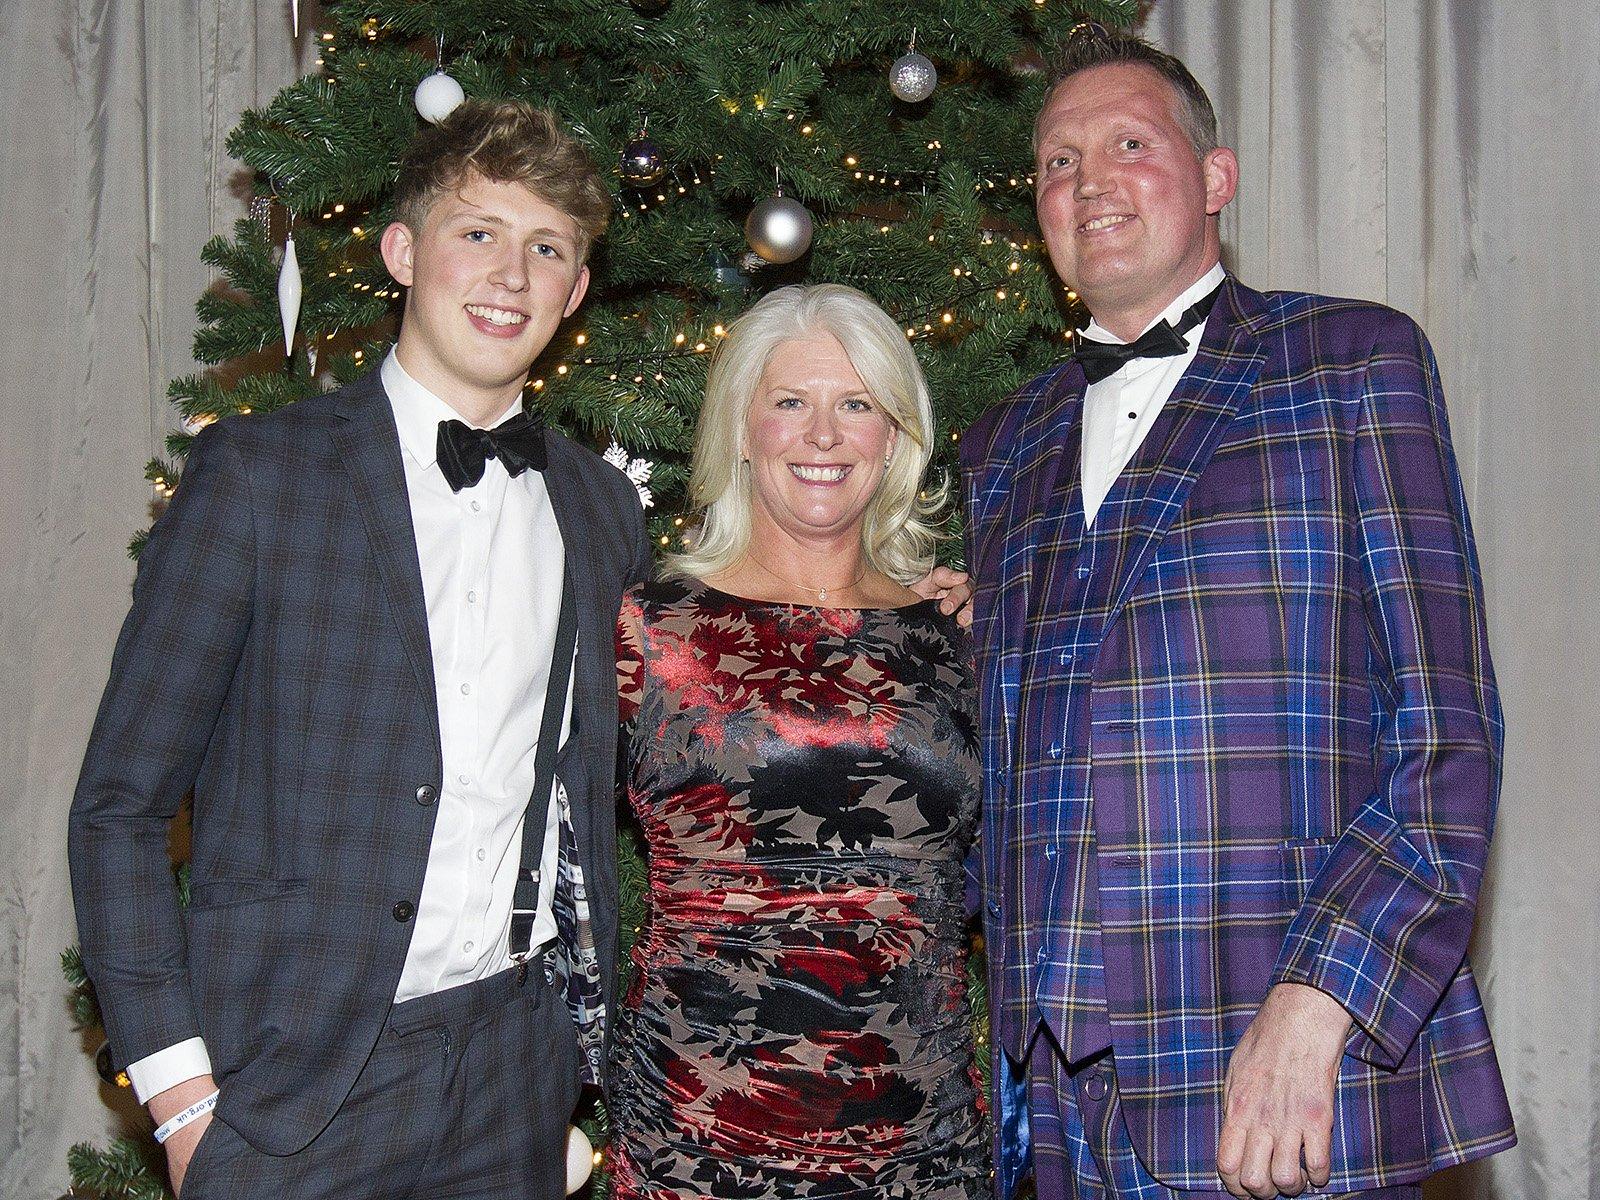 Hamish, Cathy and Doddie Weir supporting the George Crawford Legacy Trust in Kelso at the weekend.